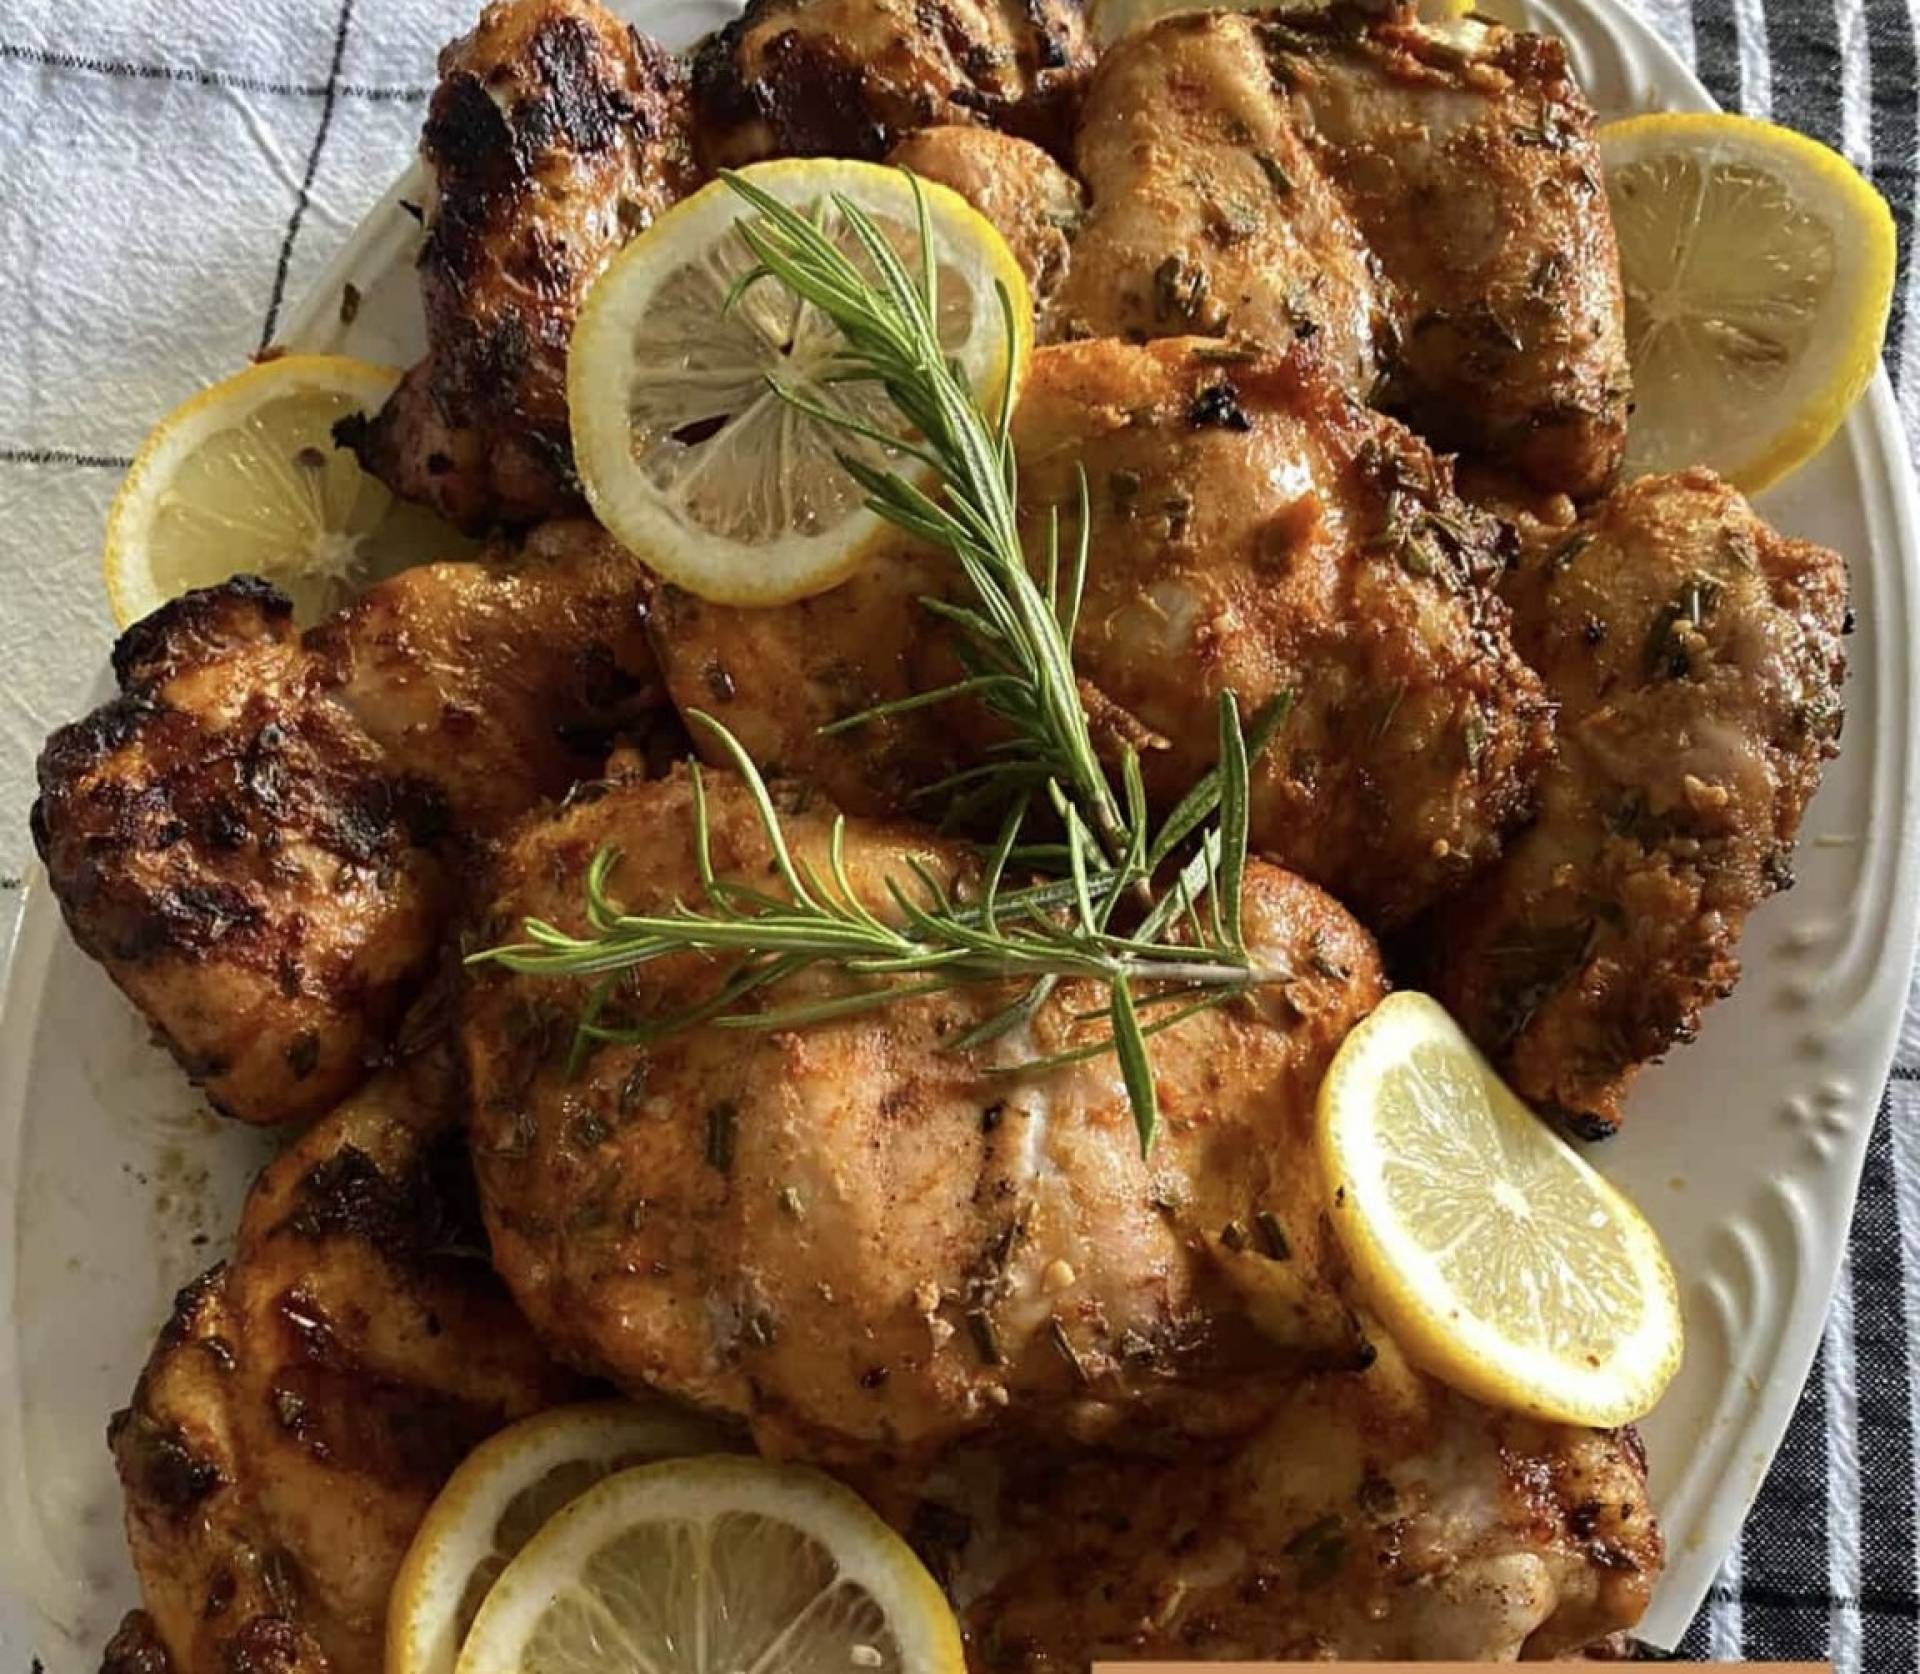 Rosemary Grilled Chicken